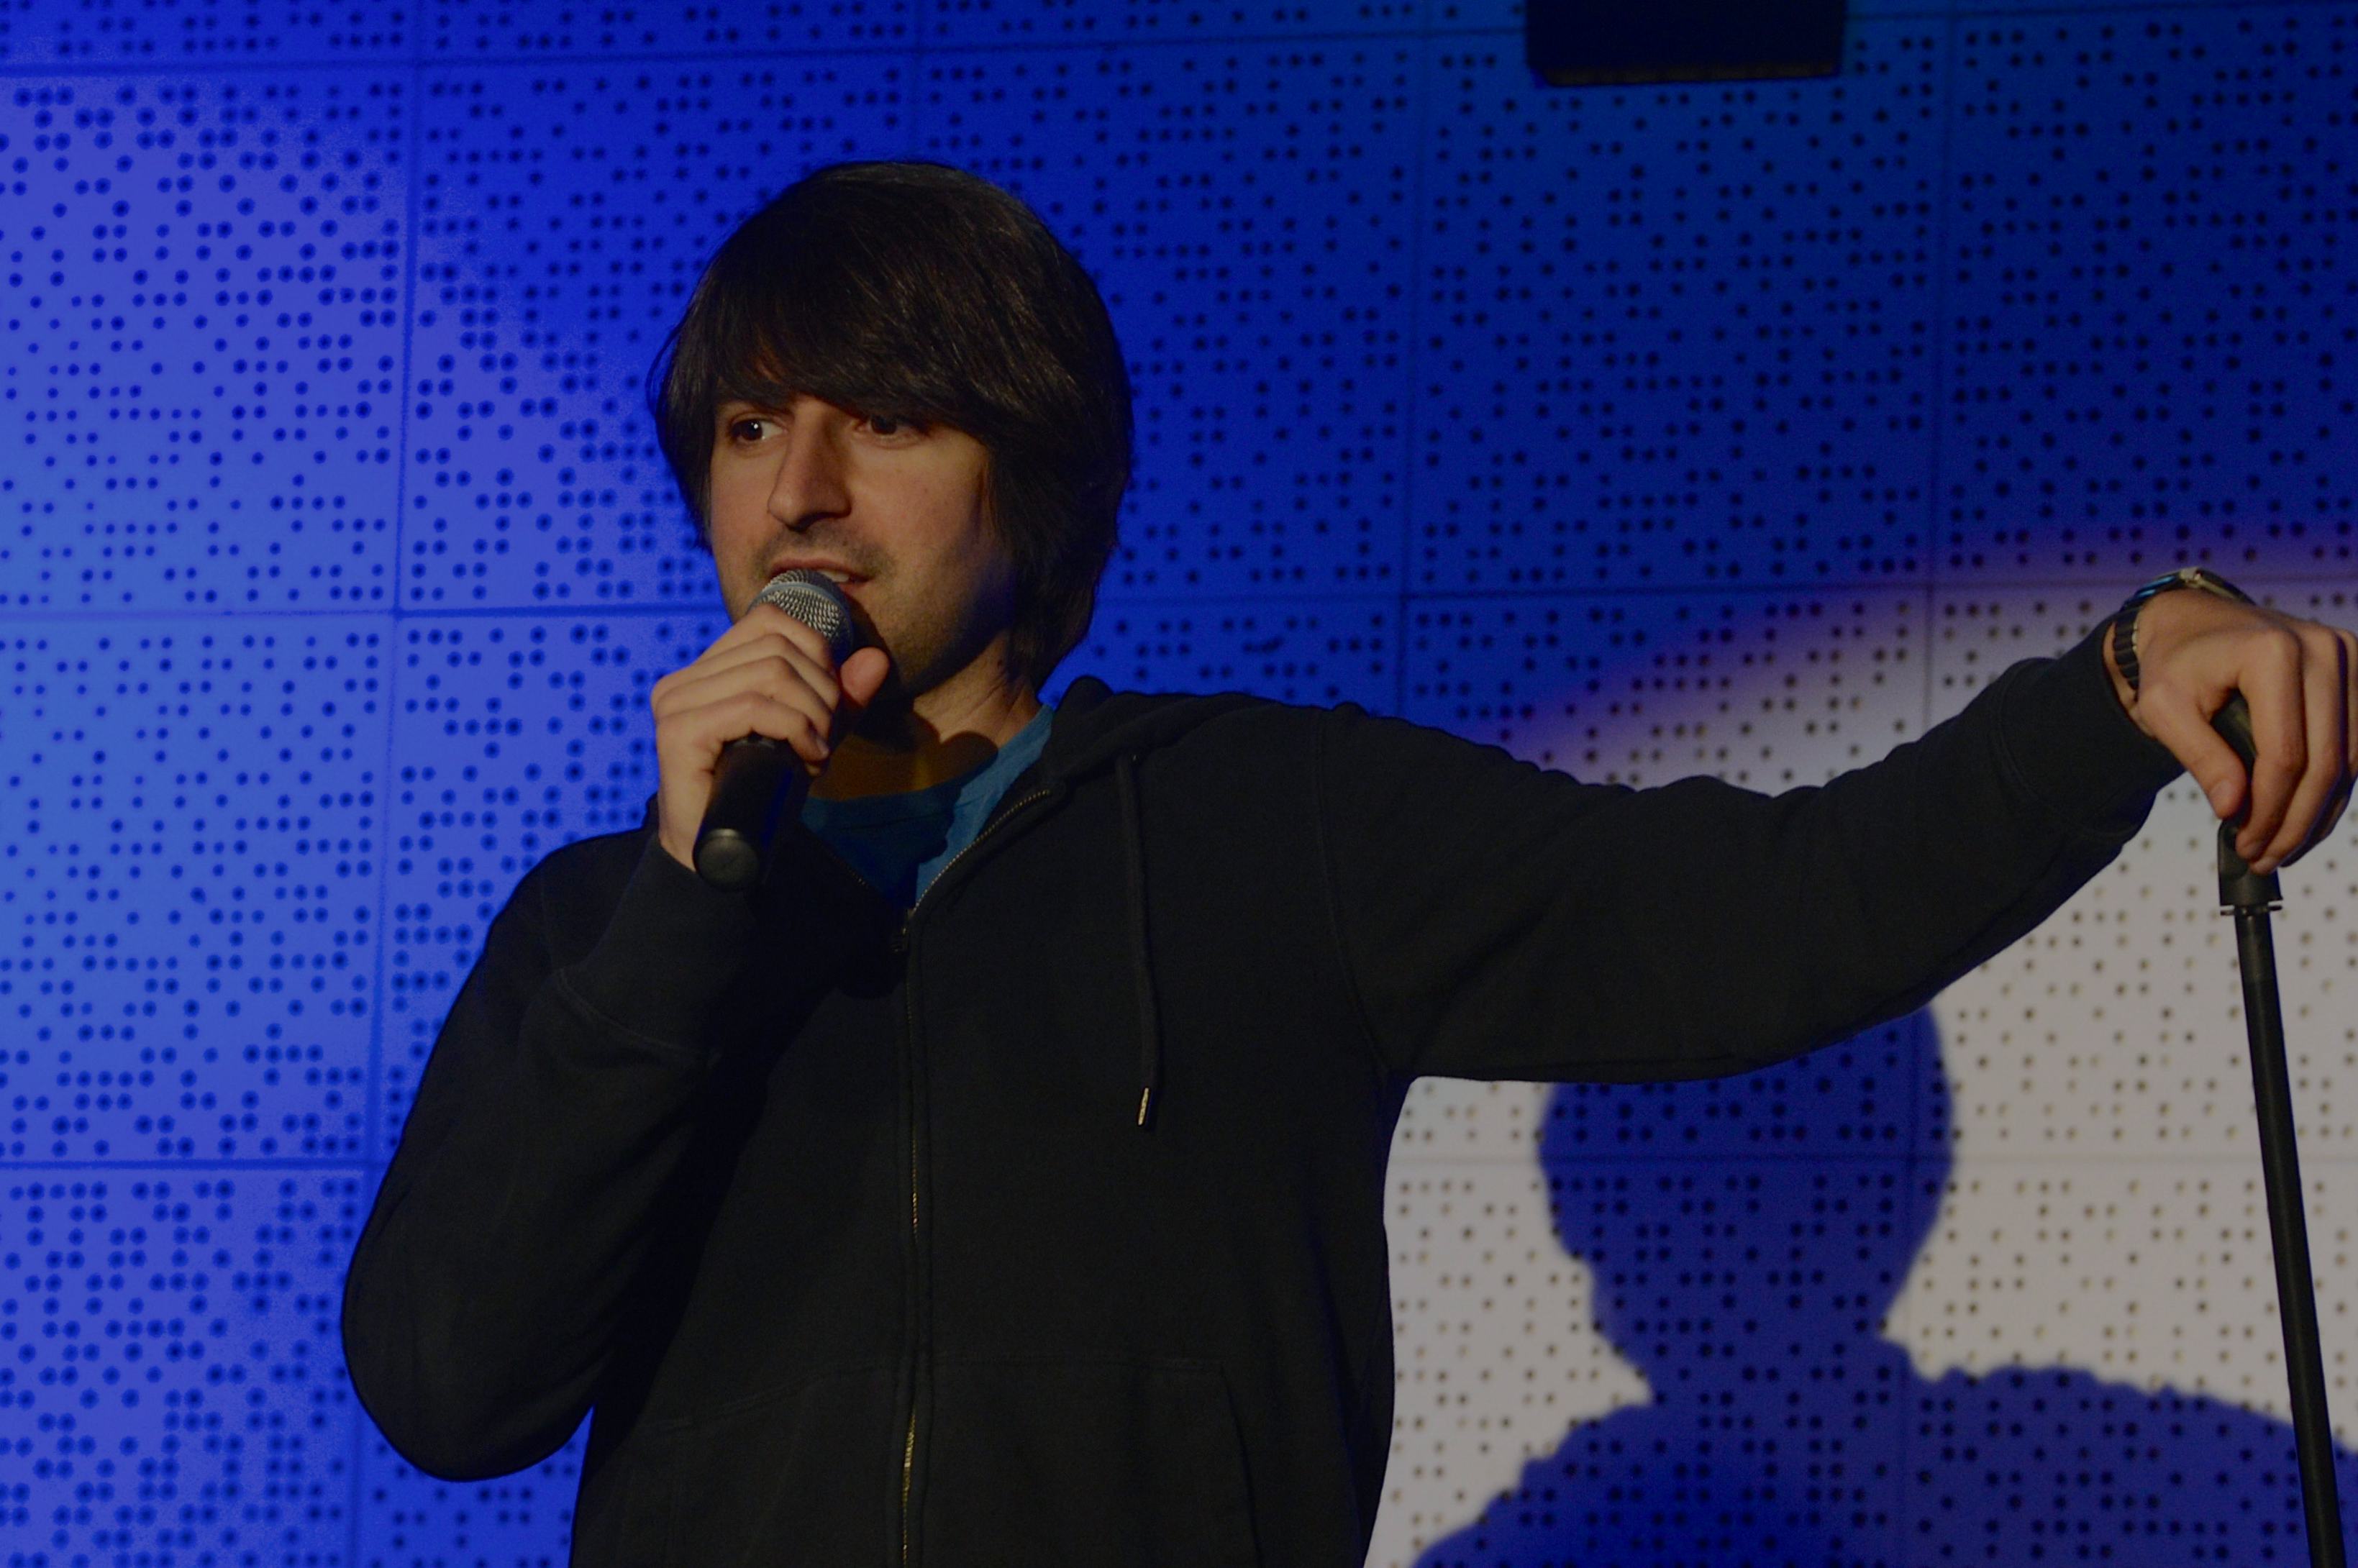 Demetri Martin's Comeback Starts With 'Dean' and a Netflix Special